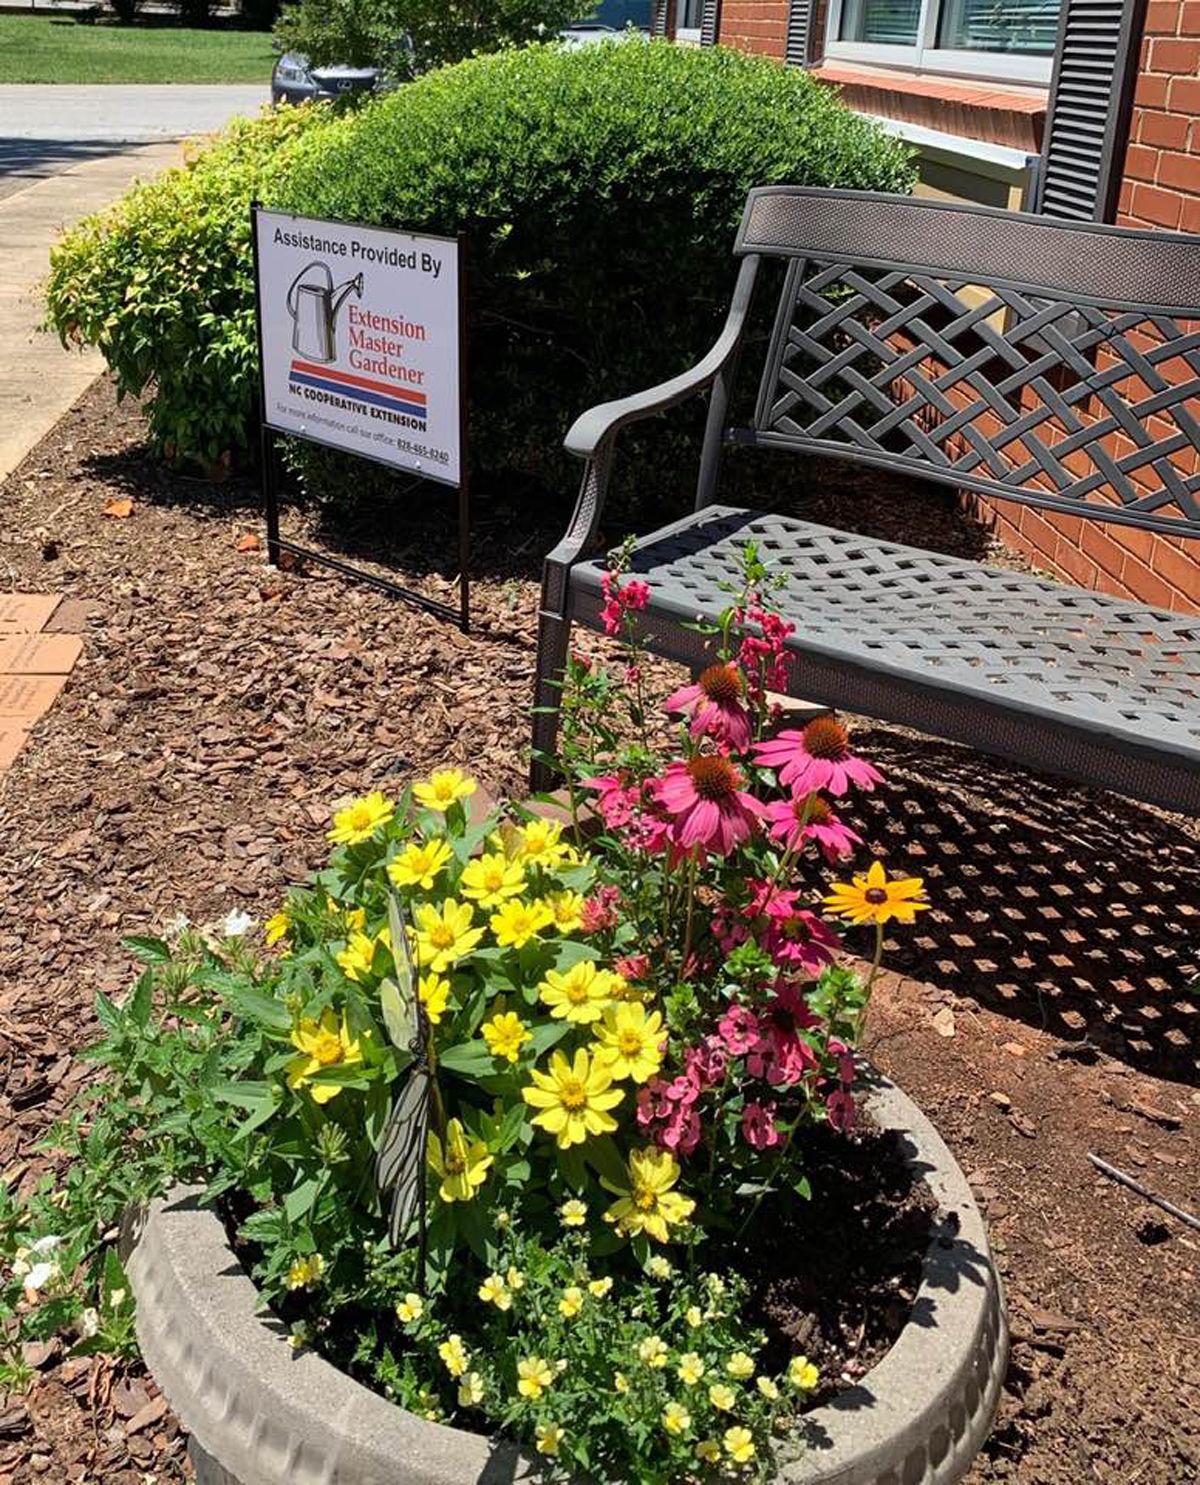 FAITH AND VALUES: Butterfly garden added at center, more | Latest ...